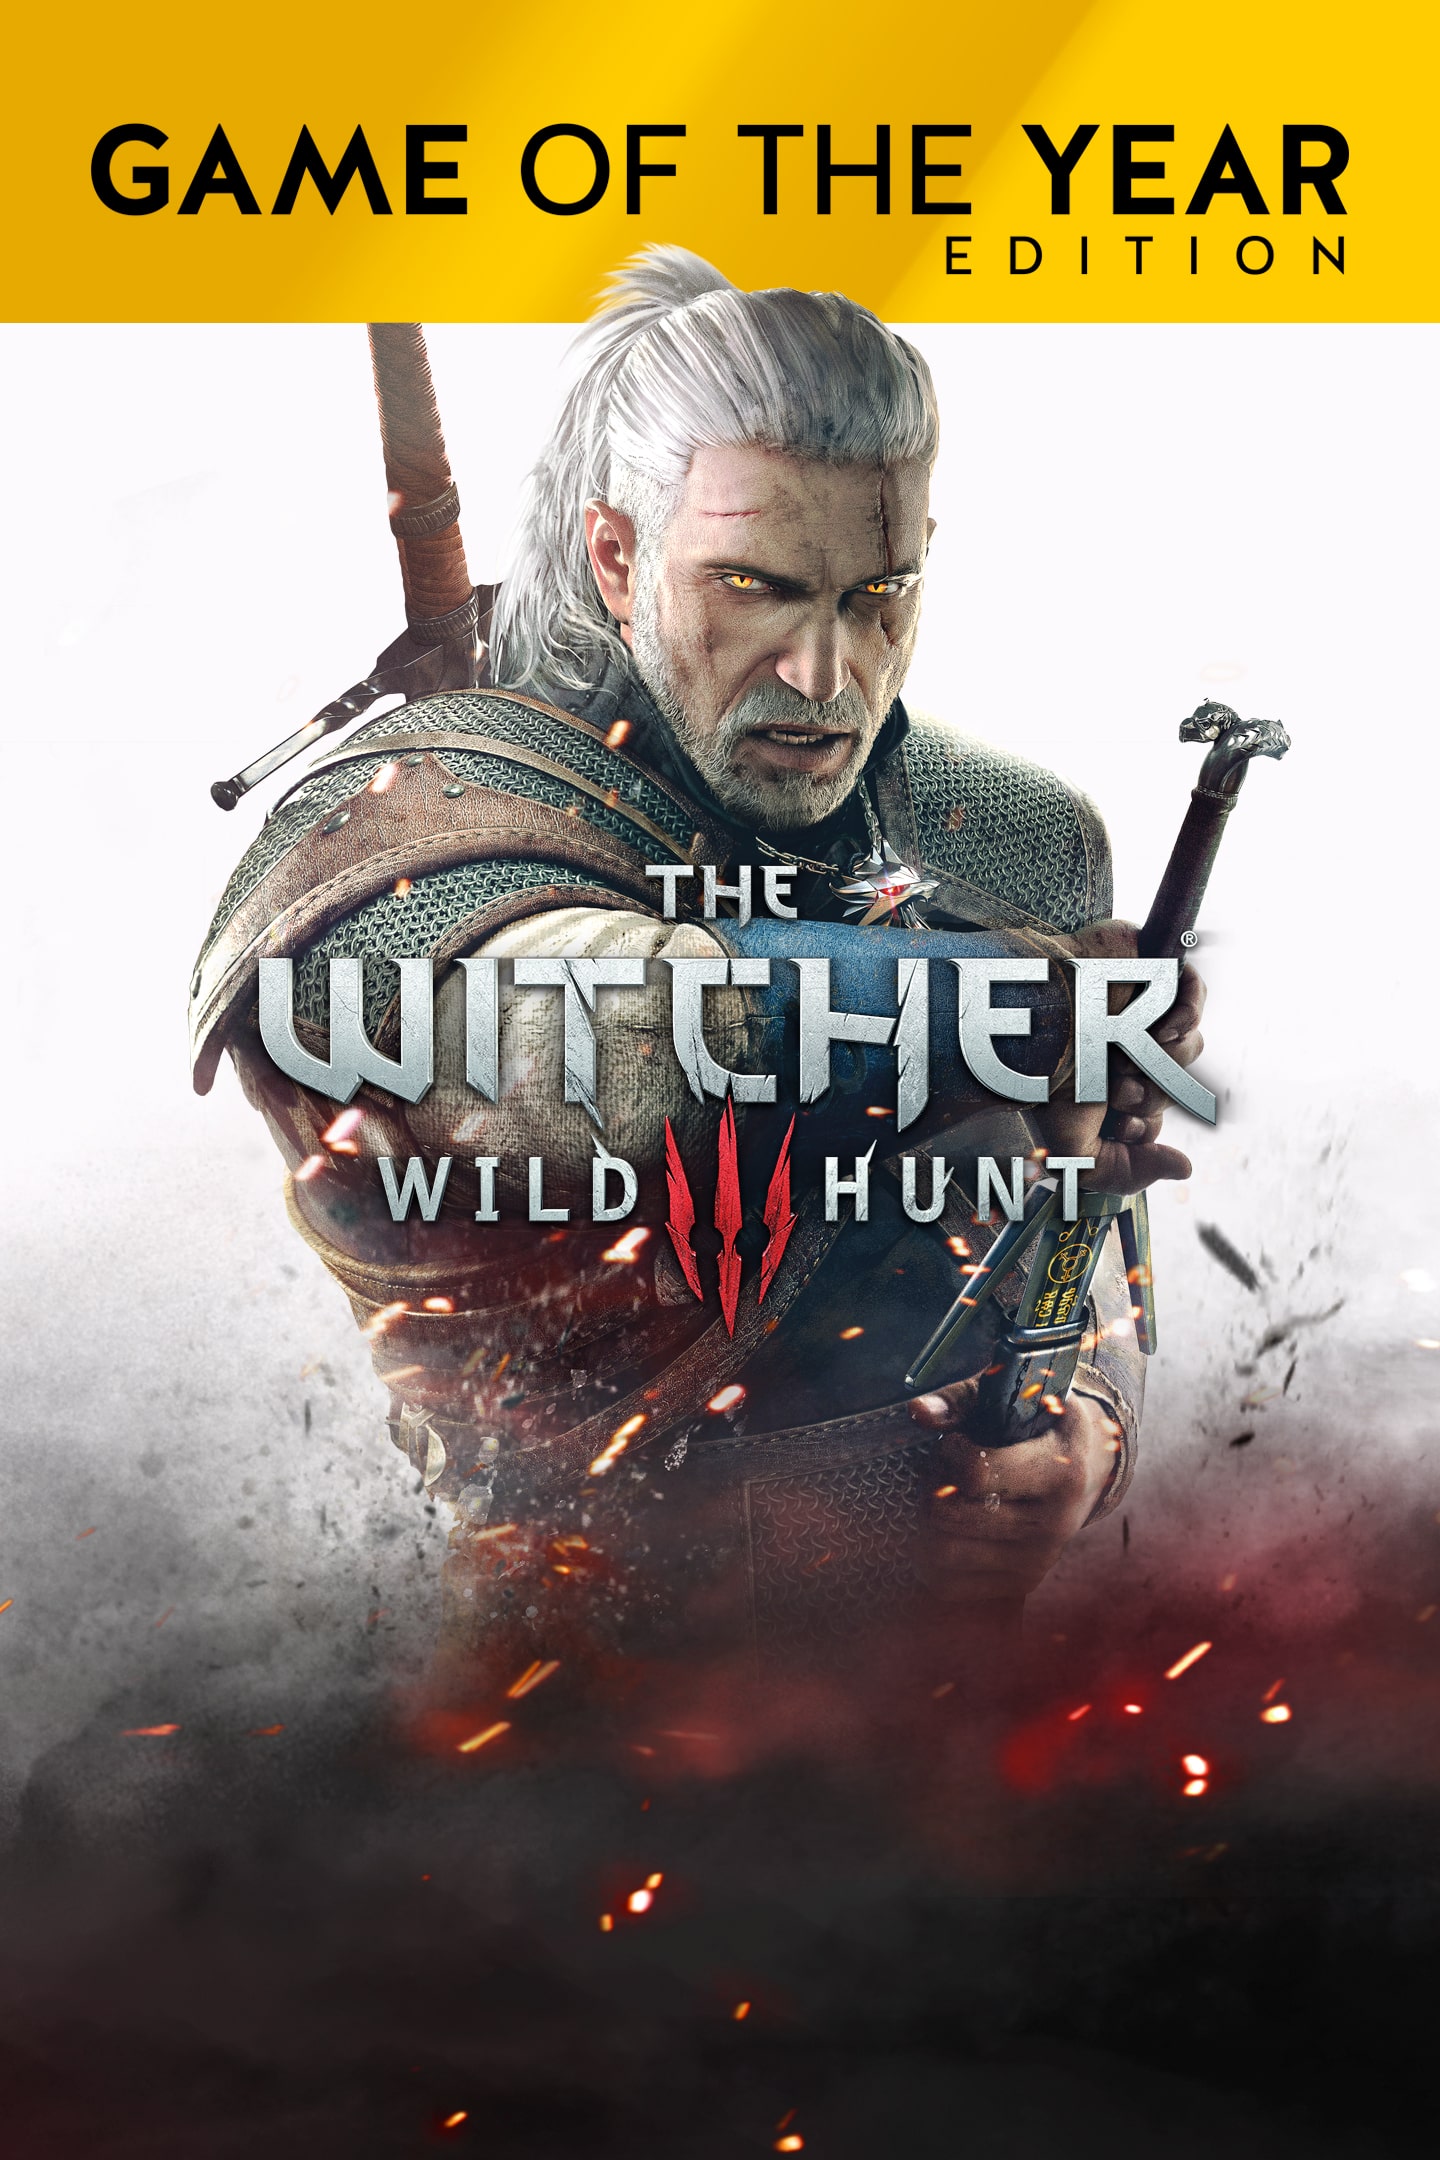 witcher 3 ps5